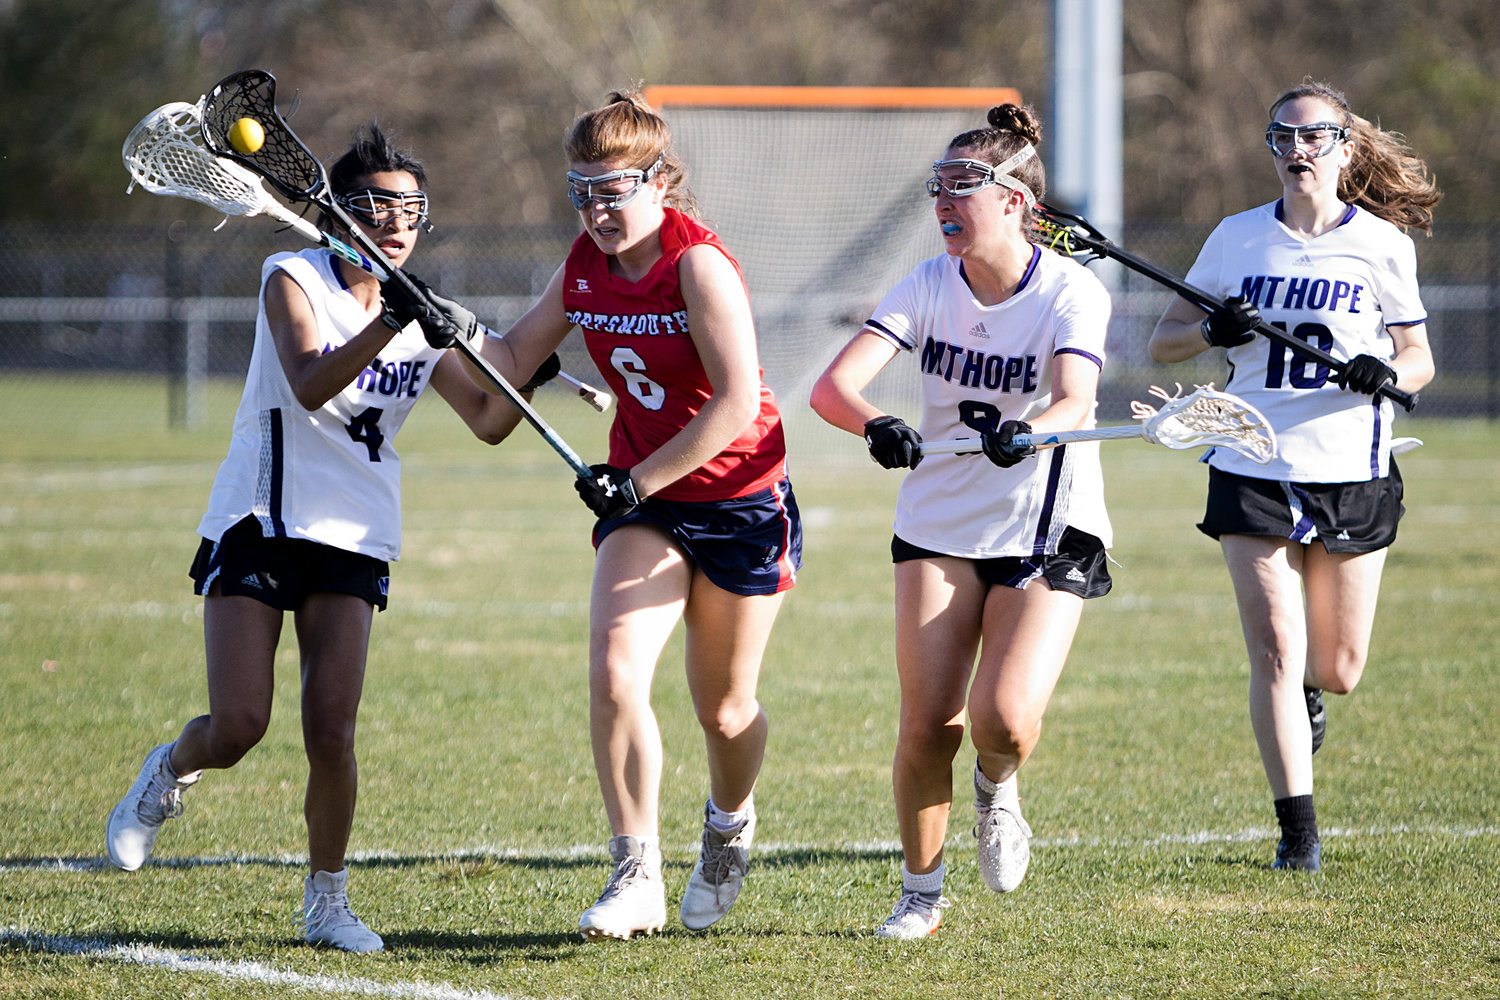 Emilie Bobola squeezes through a trio of Mt. Hope opponents while advancing the ball toward the goal.